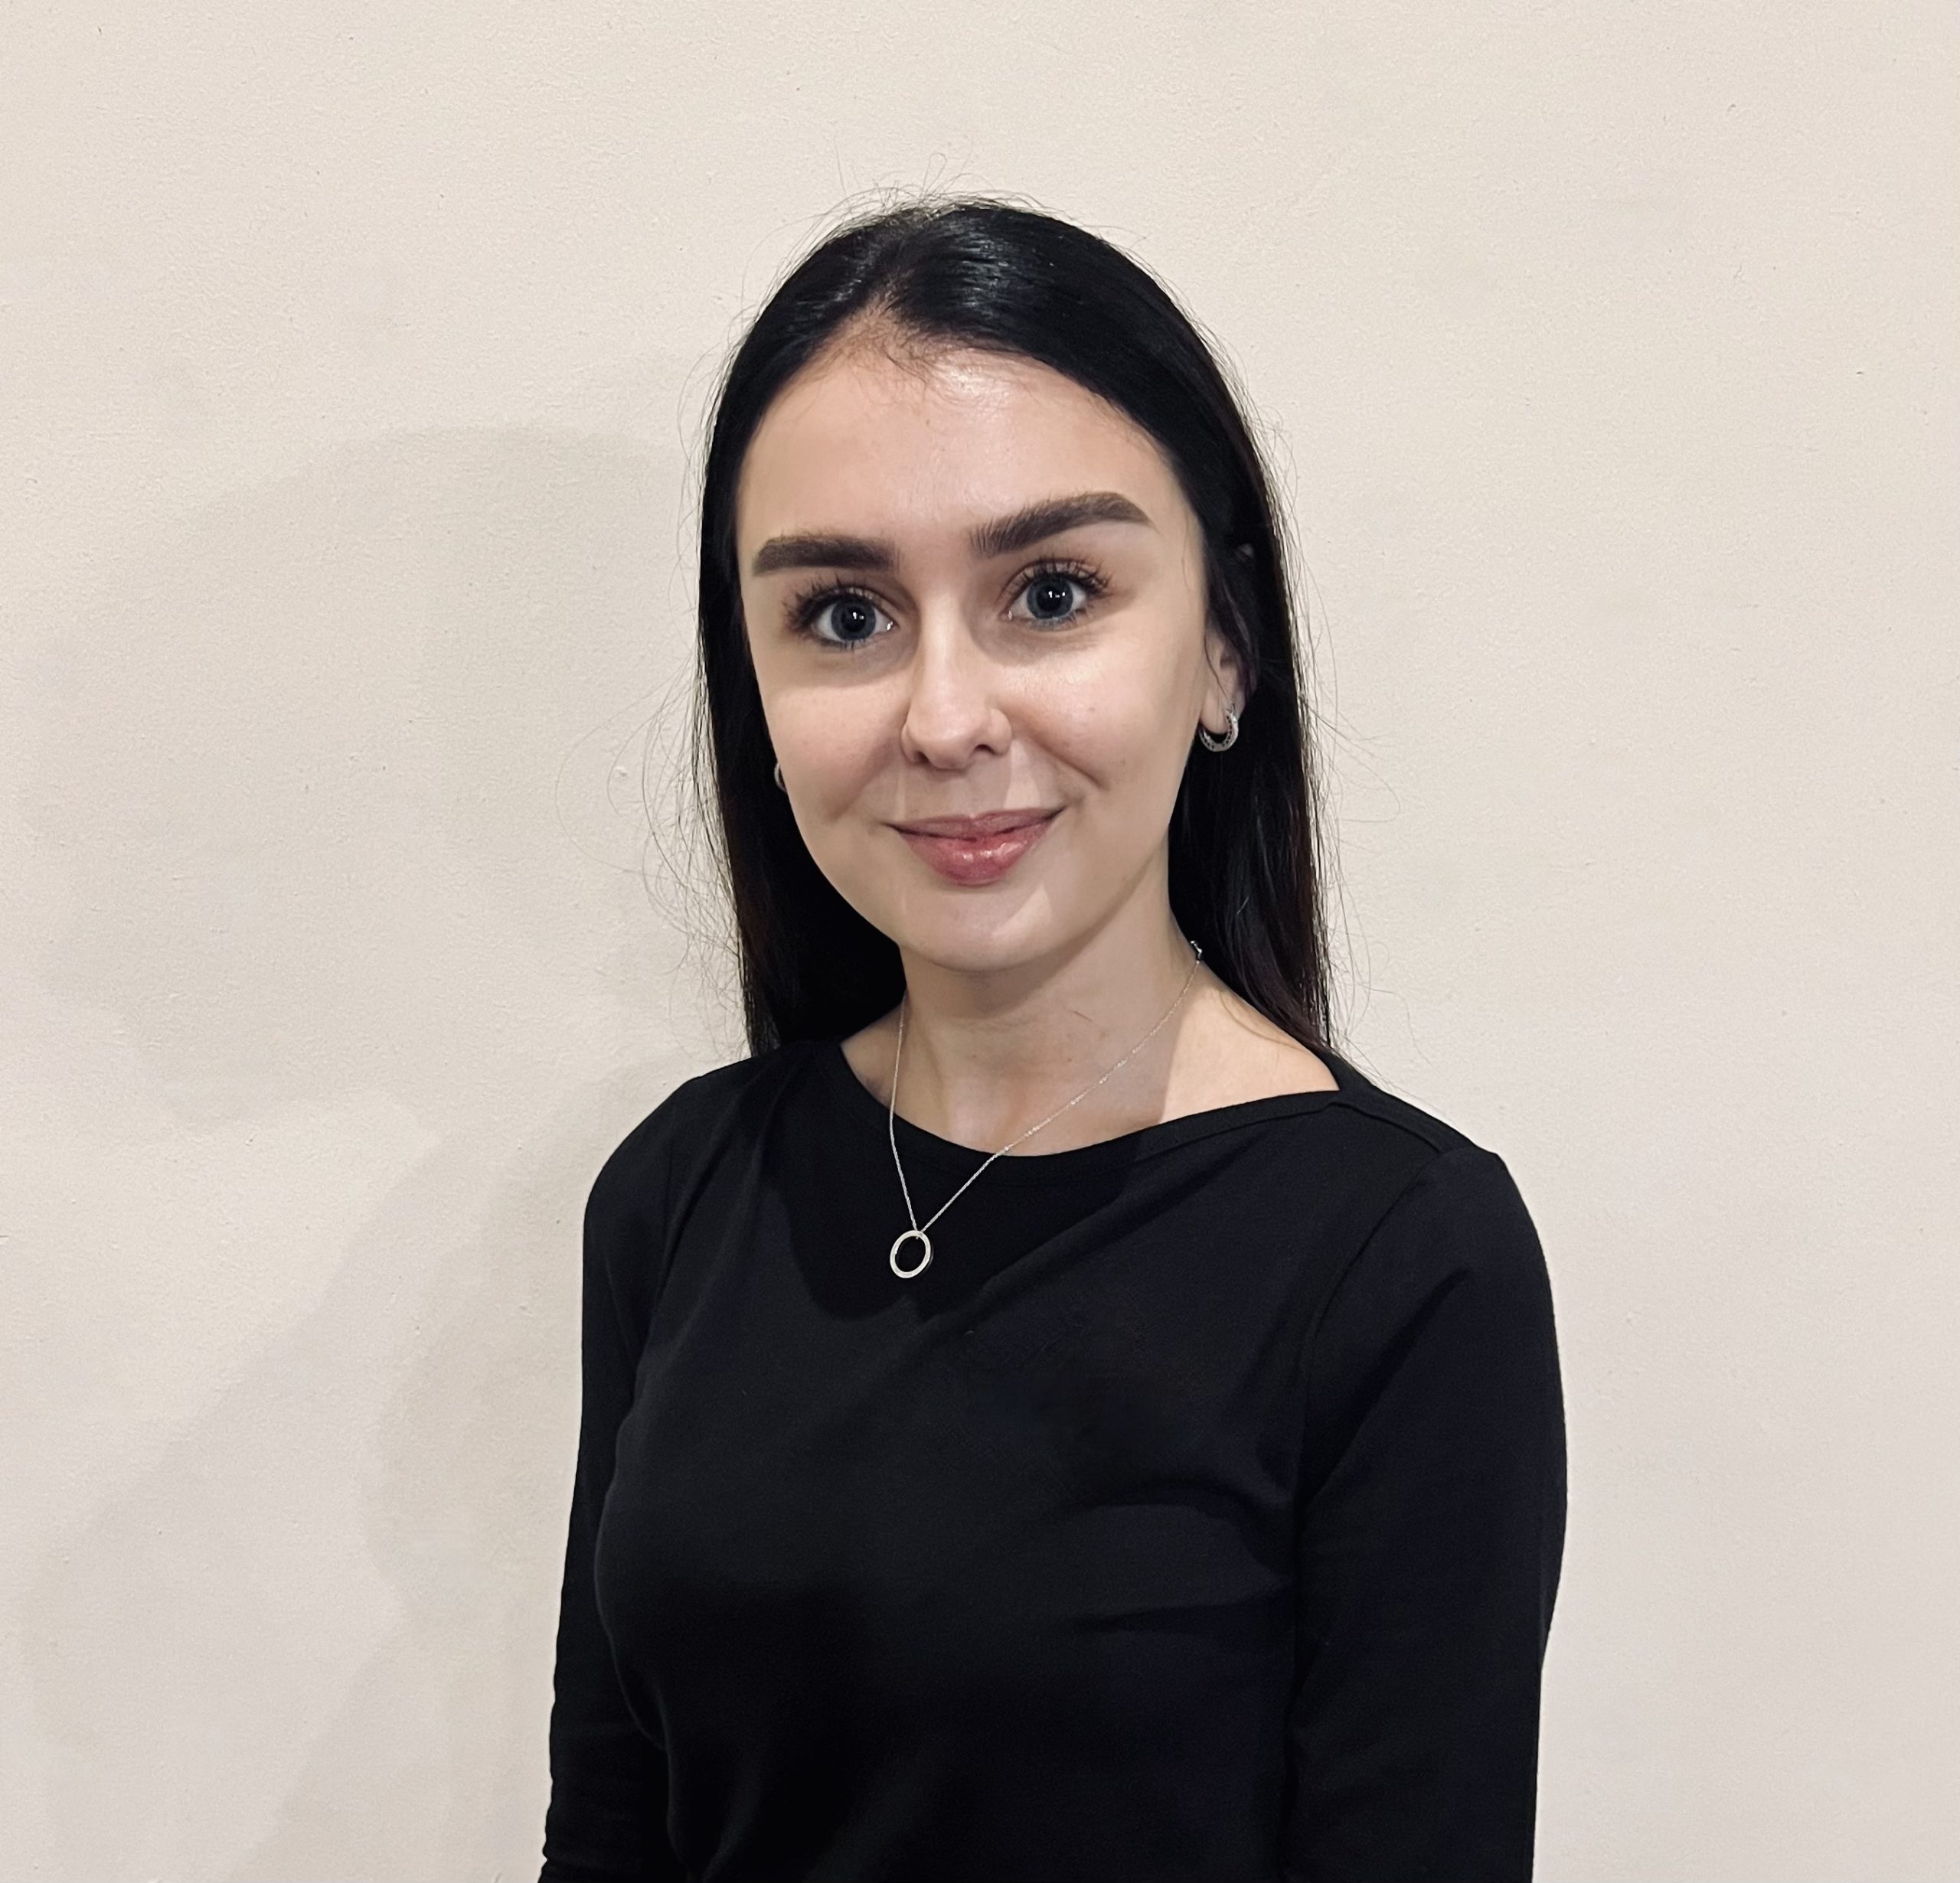 Brittany Nocivelli is a PhD student at Cardiff University, School of Medicine, working in the Division of Population Medicine and the Centre for Trials Research groups.